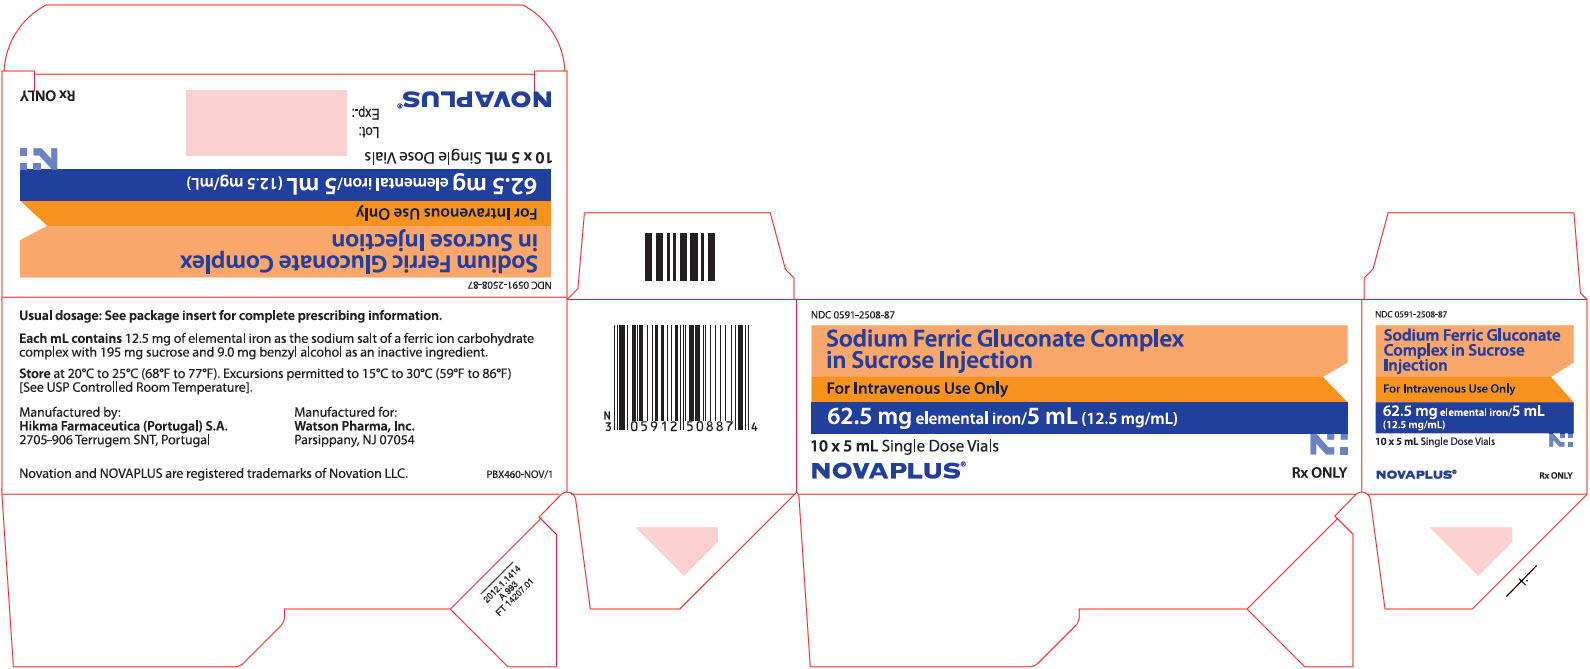 NDC 0591-2508-87 Sodium Ferric Gluconate Complex in Sucrose Injection For Intravenous Use Only 62.5 mg elemental iron/5 mL (12.5 mg/mL) 10 x 5 mL Single Dose Vial NOVAPLUS®